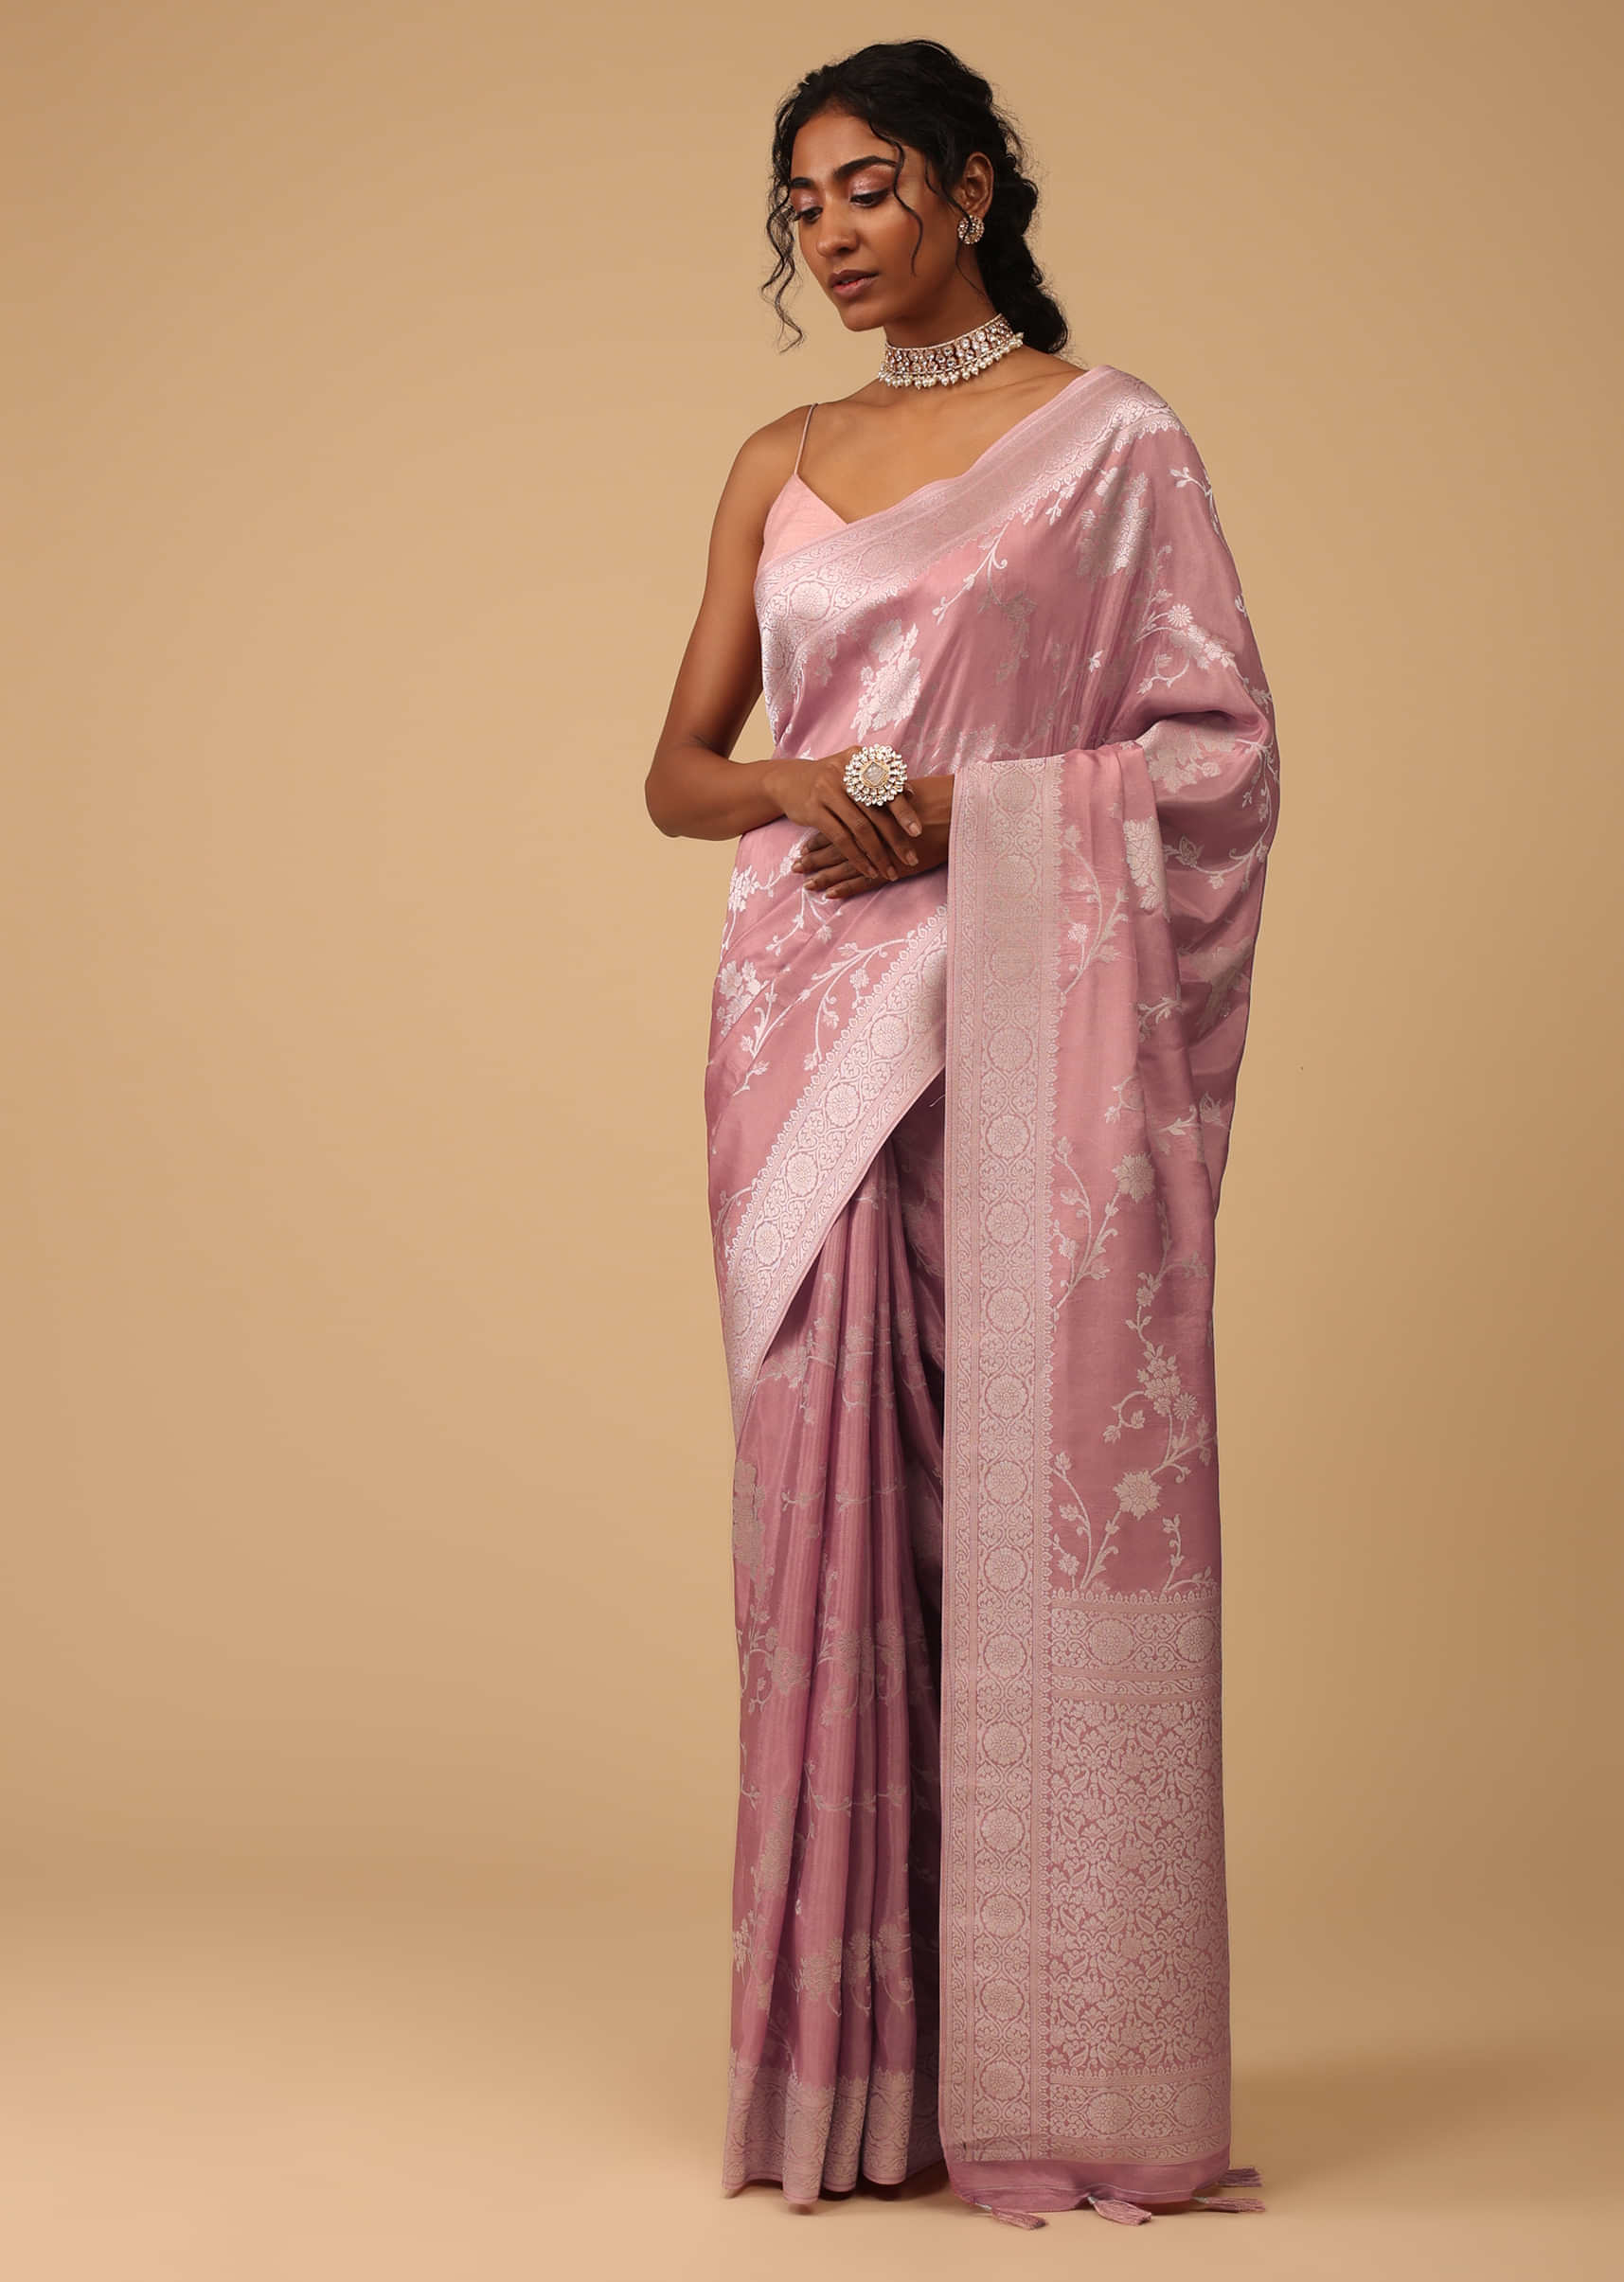 Salmon Pink Saree In Dola Silk With Silver Zari Floral Jaal